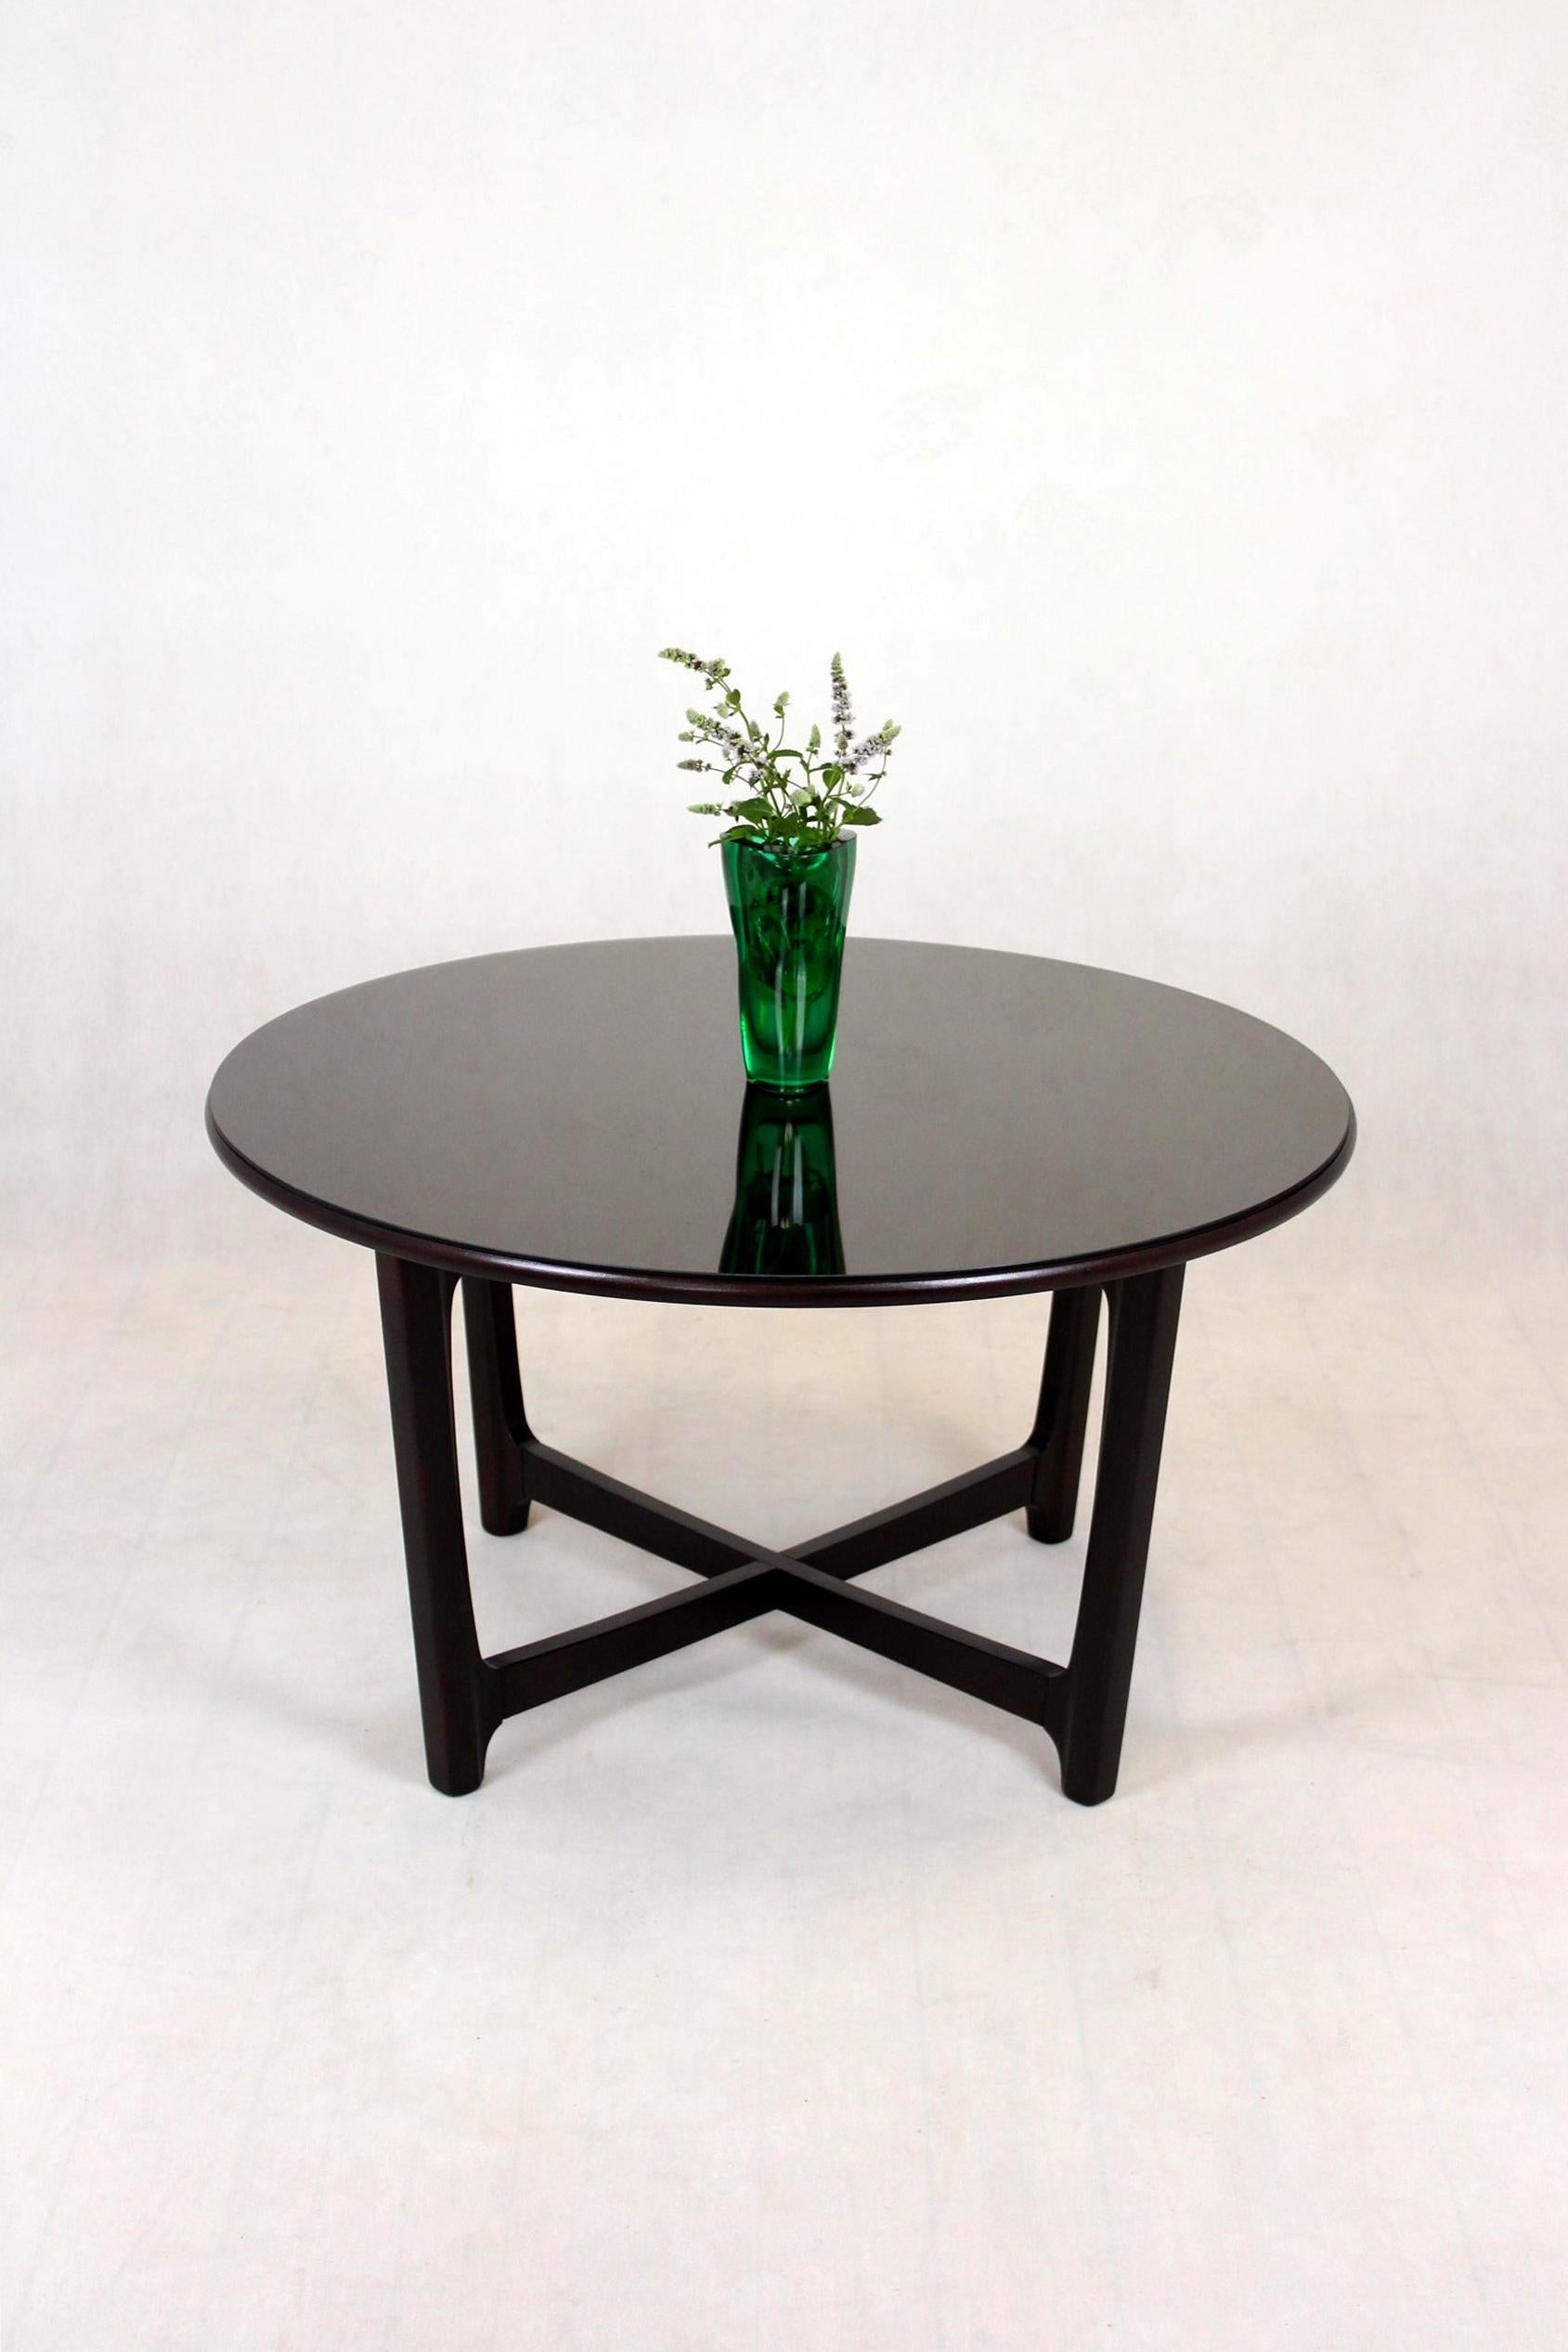 This round coffee table was made in Czechoslovakia in the 1970s. The table has been restored, lacquered in a satin finish. There is also a glass on the top (original from the 1970s, with visible scratches), which can be easily removed.
